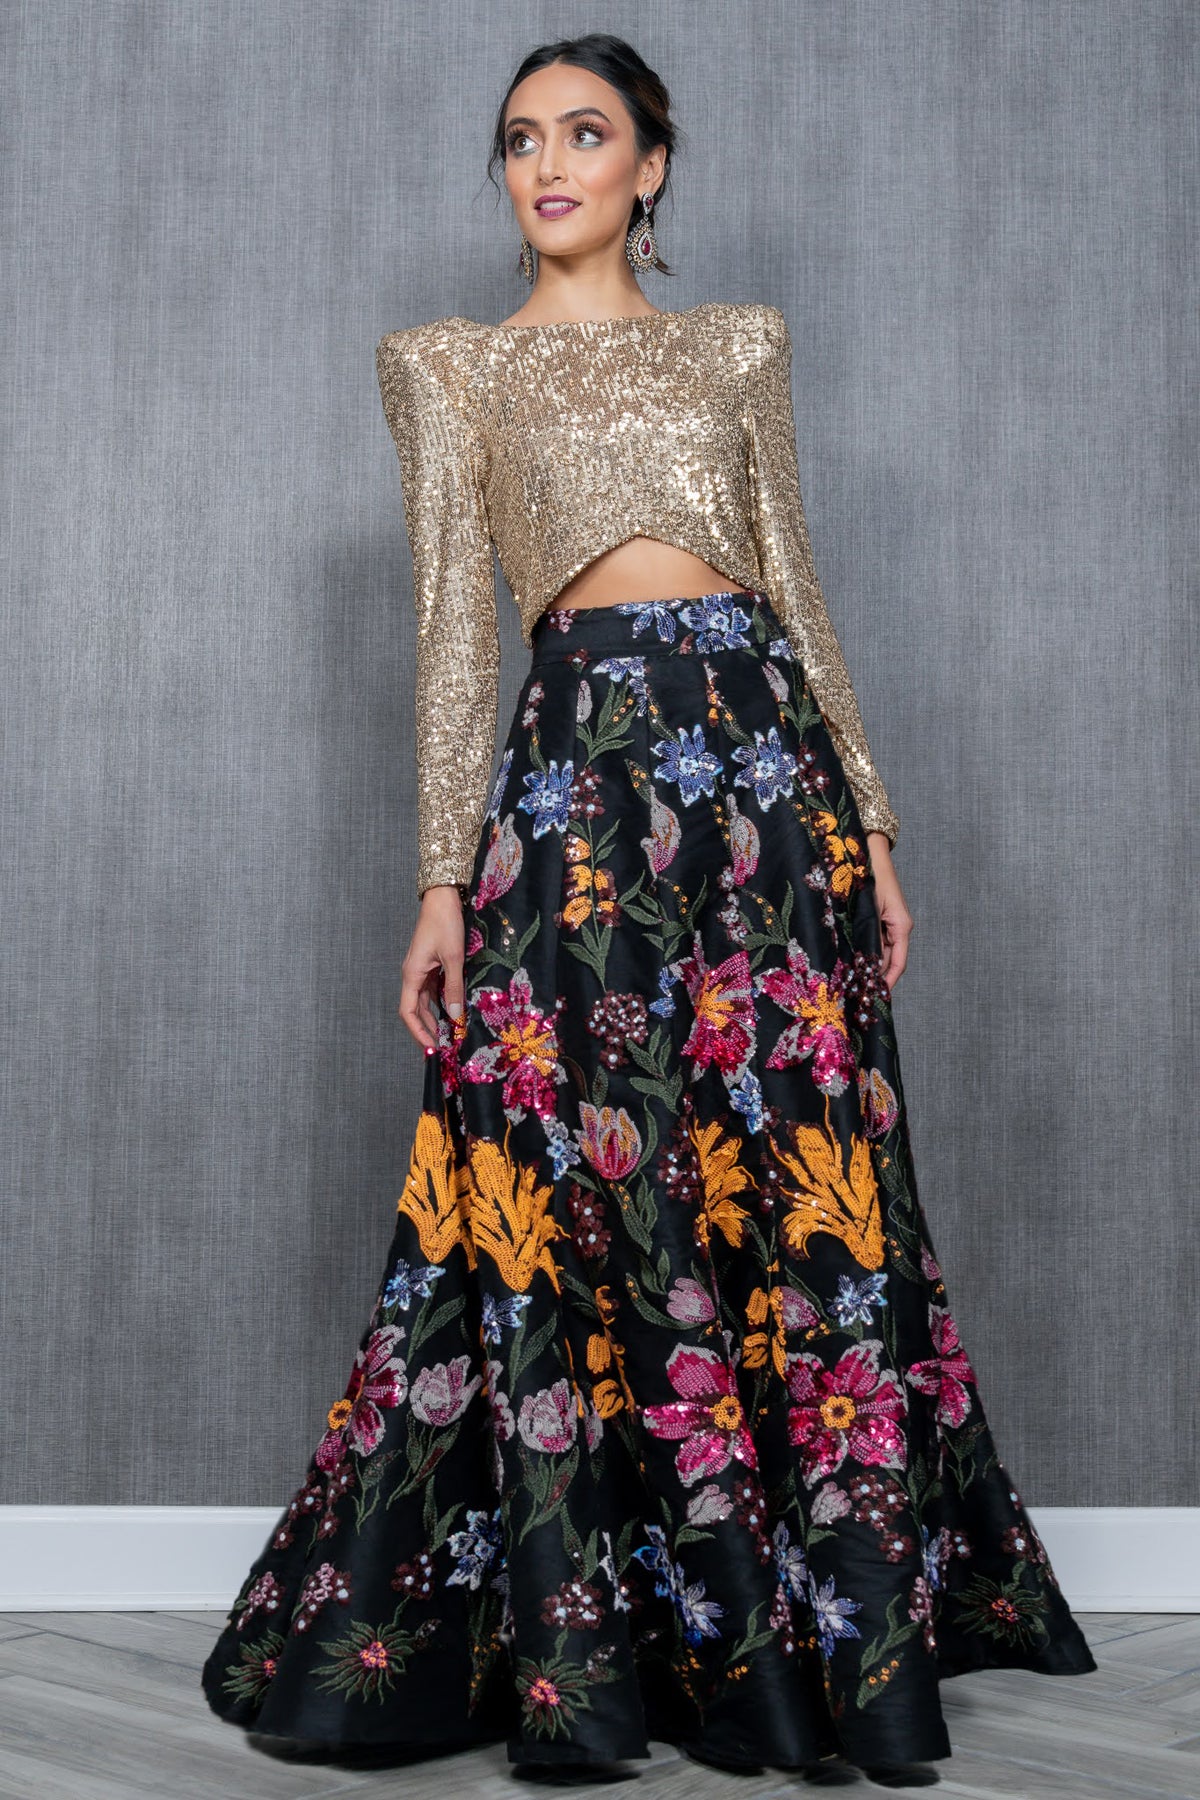 Model in the High Waisted Black Pallavi Lehenga Skirt with Vibrant Floral Details styled with the Long Sleeve Gold Sequin Naina Top